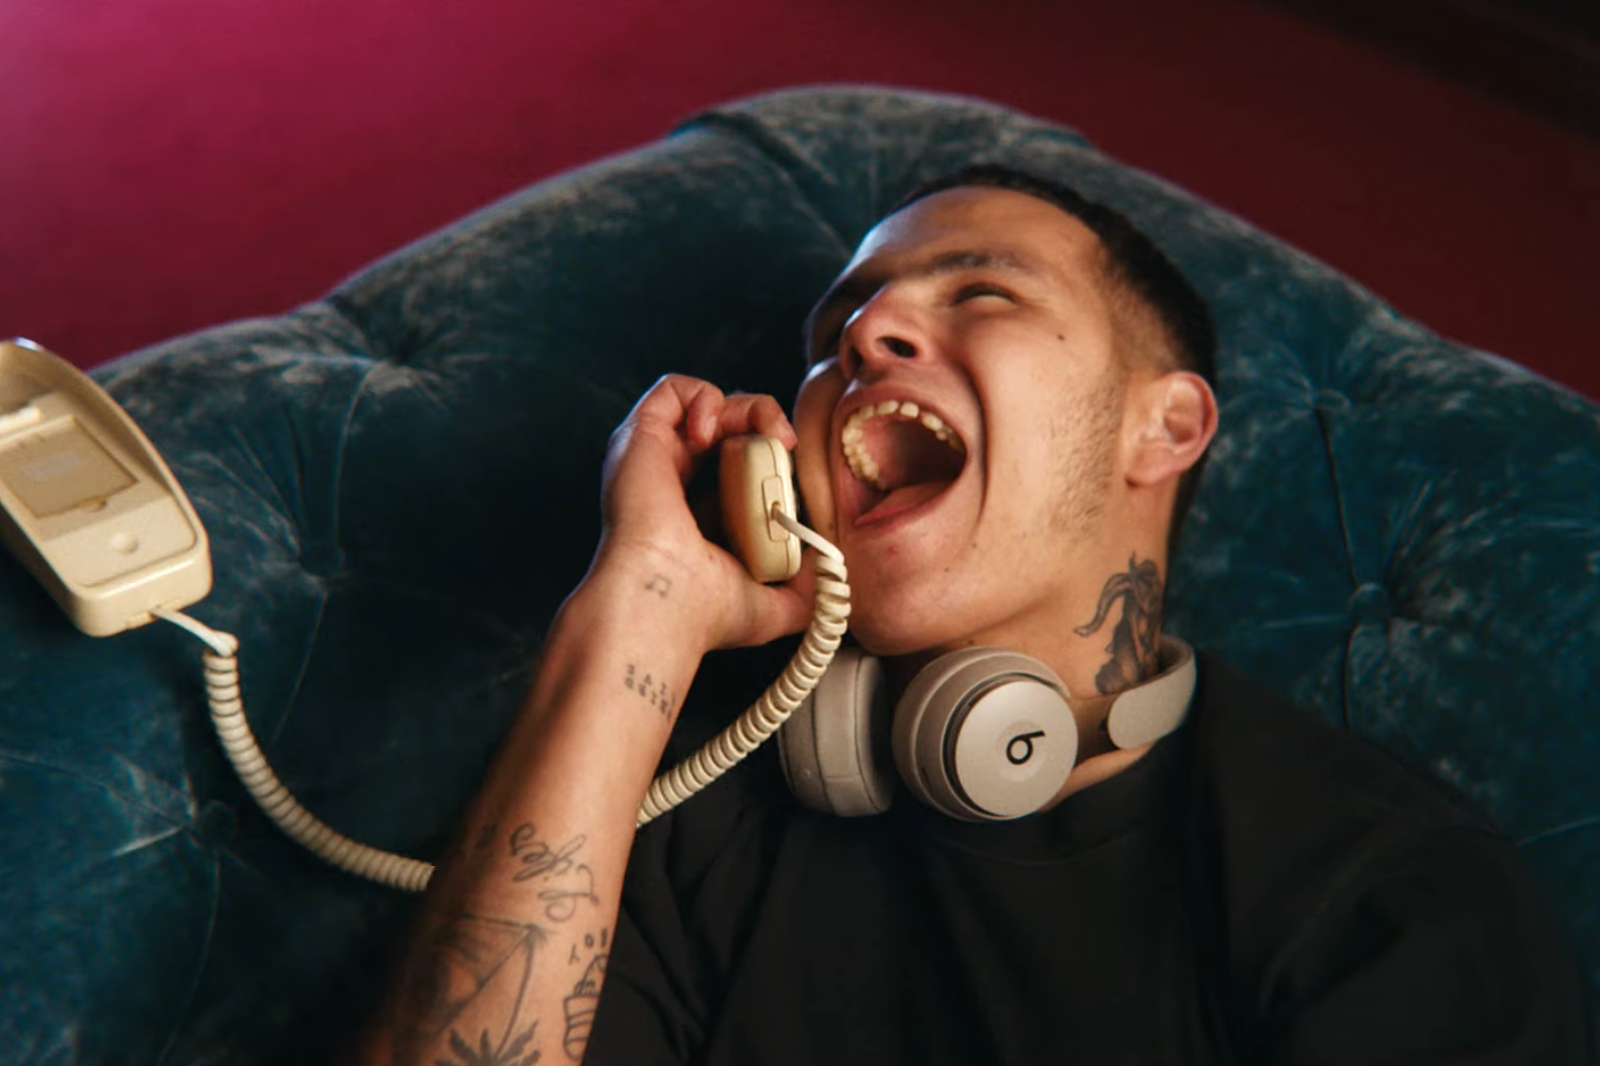 slowthai links up with Skepta for 'CANCELLED'